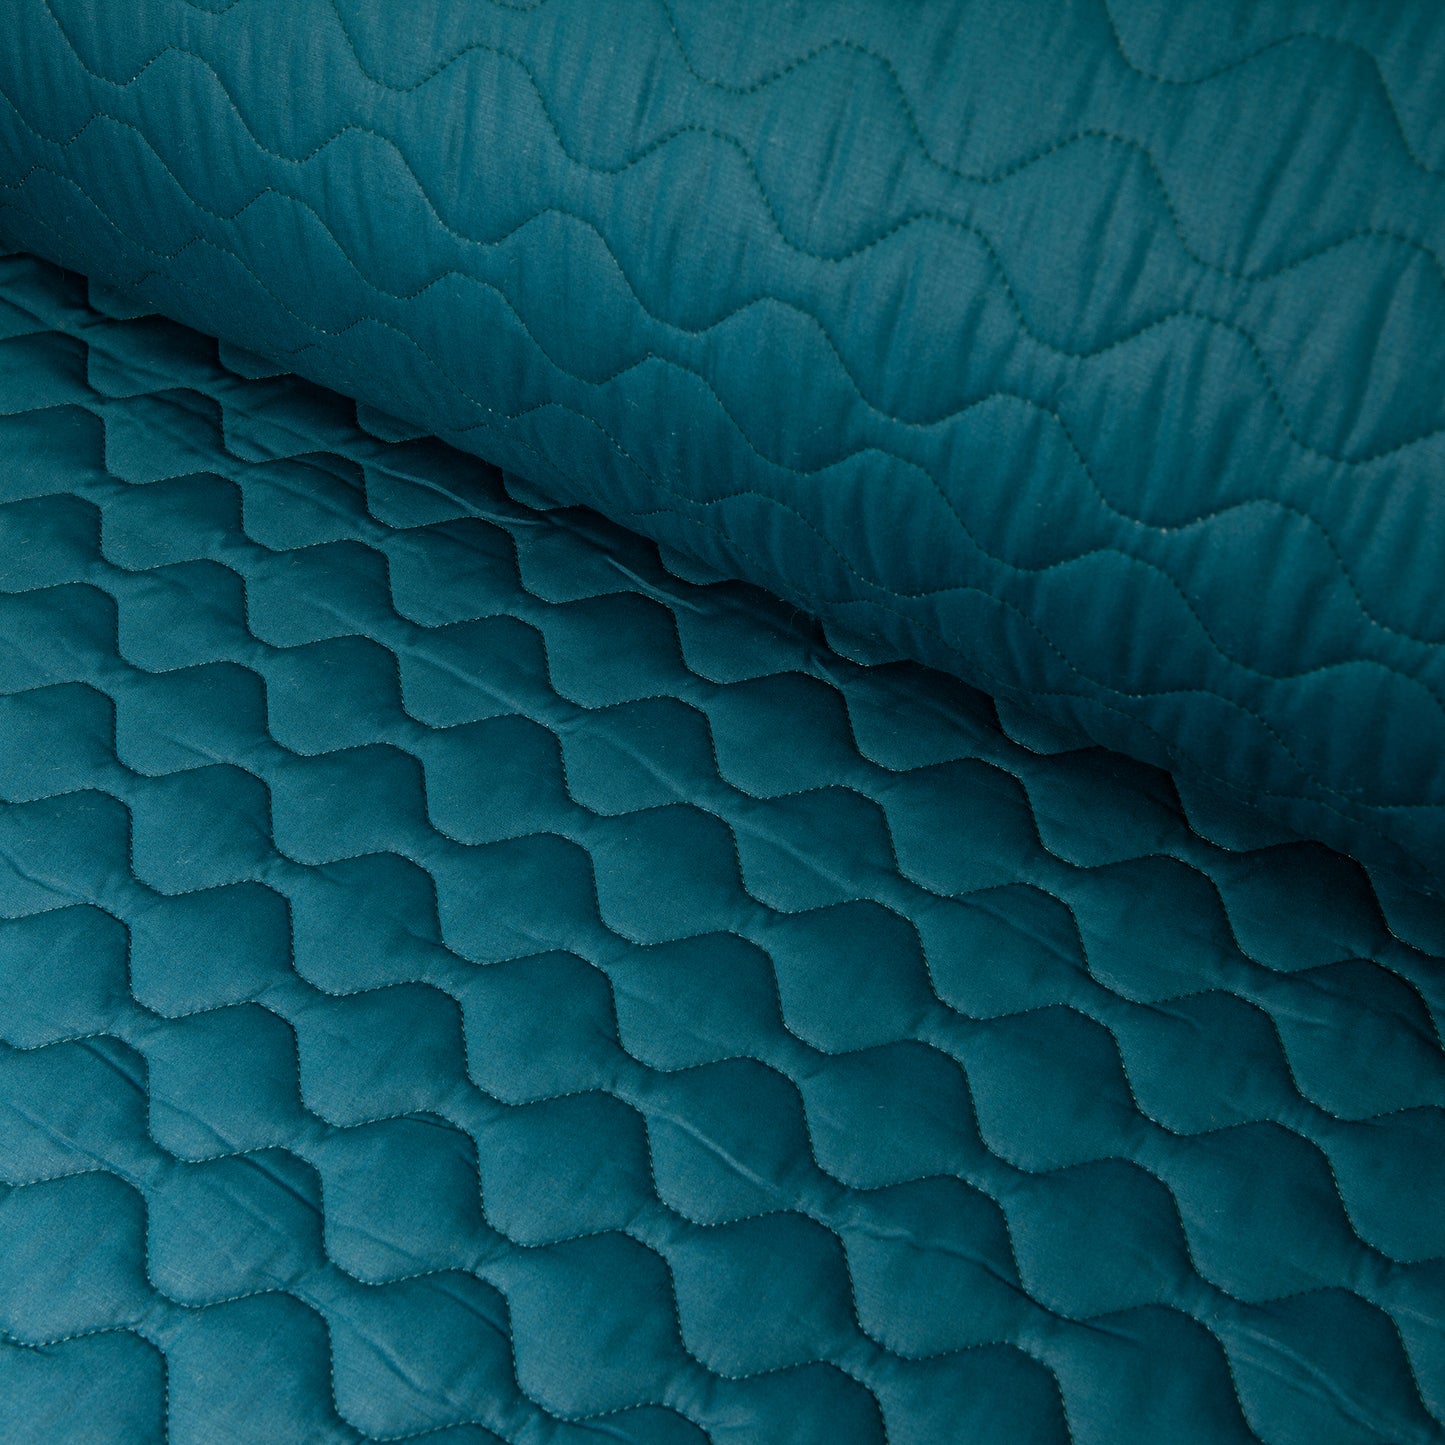 Cotton Quilt - Teal (wide)